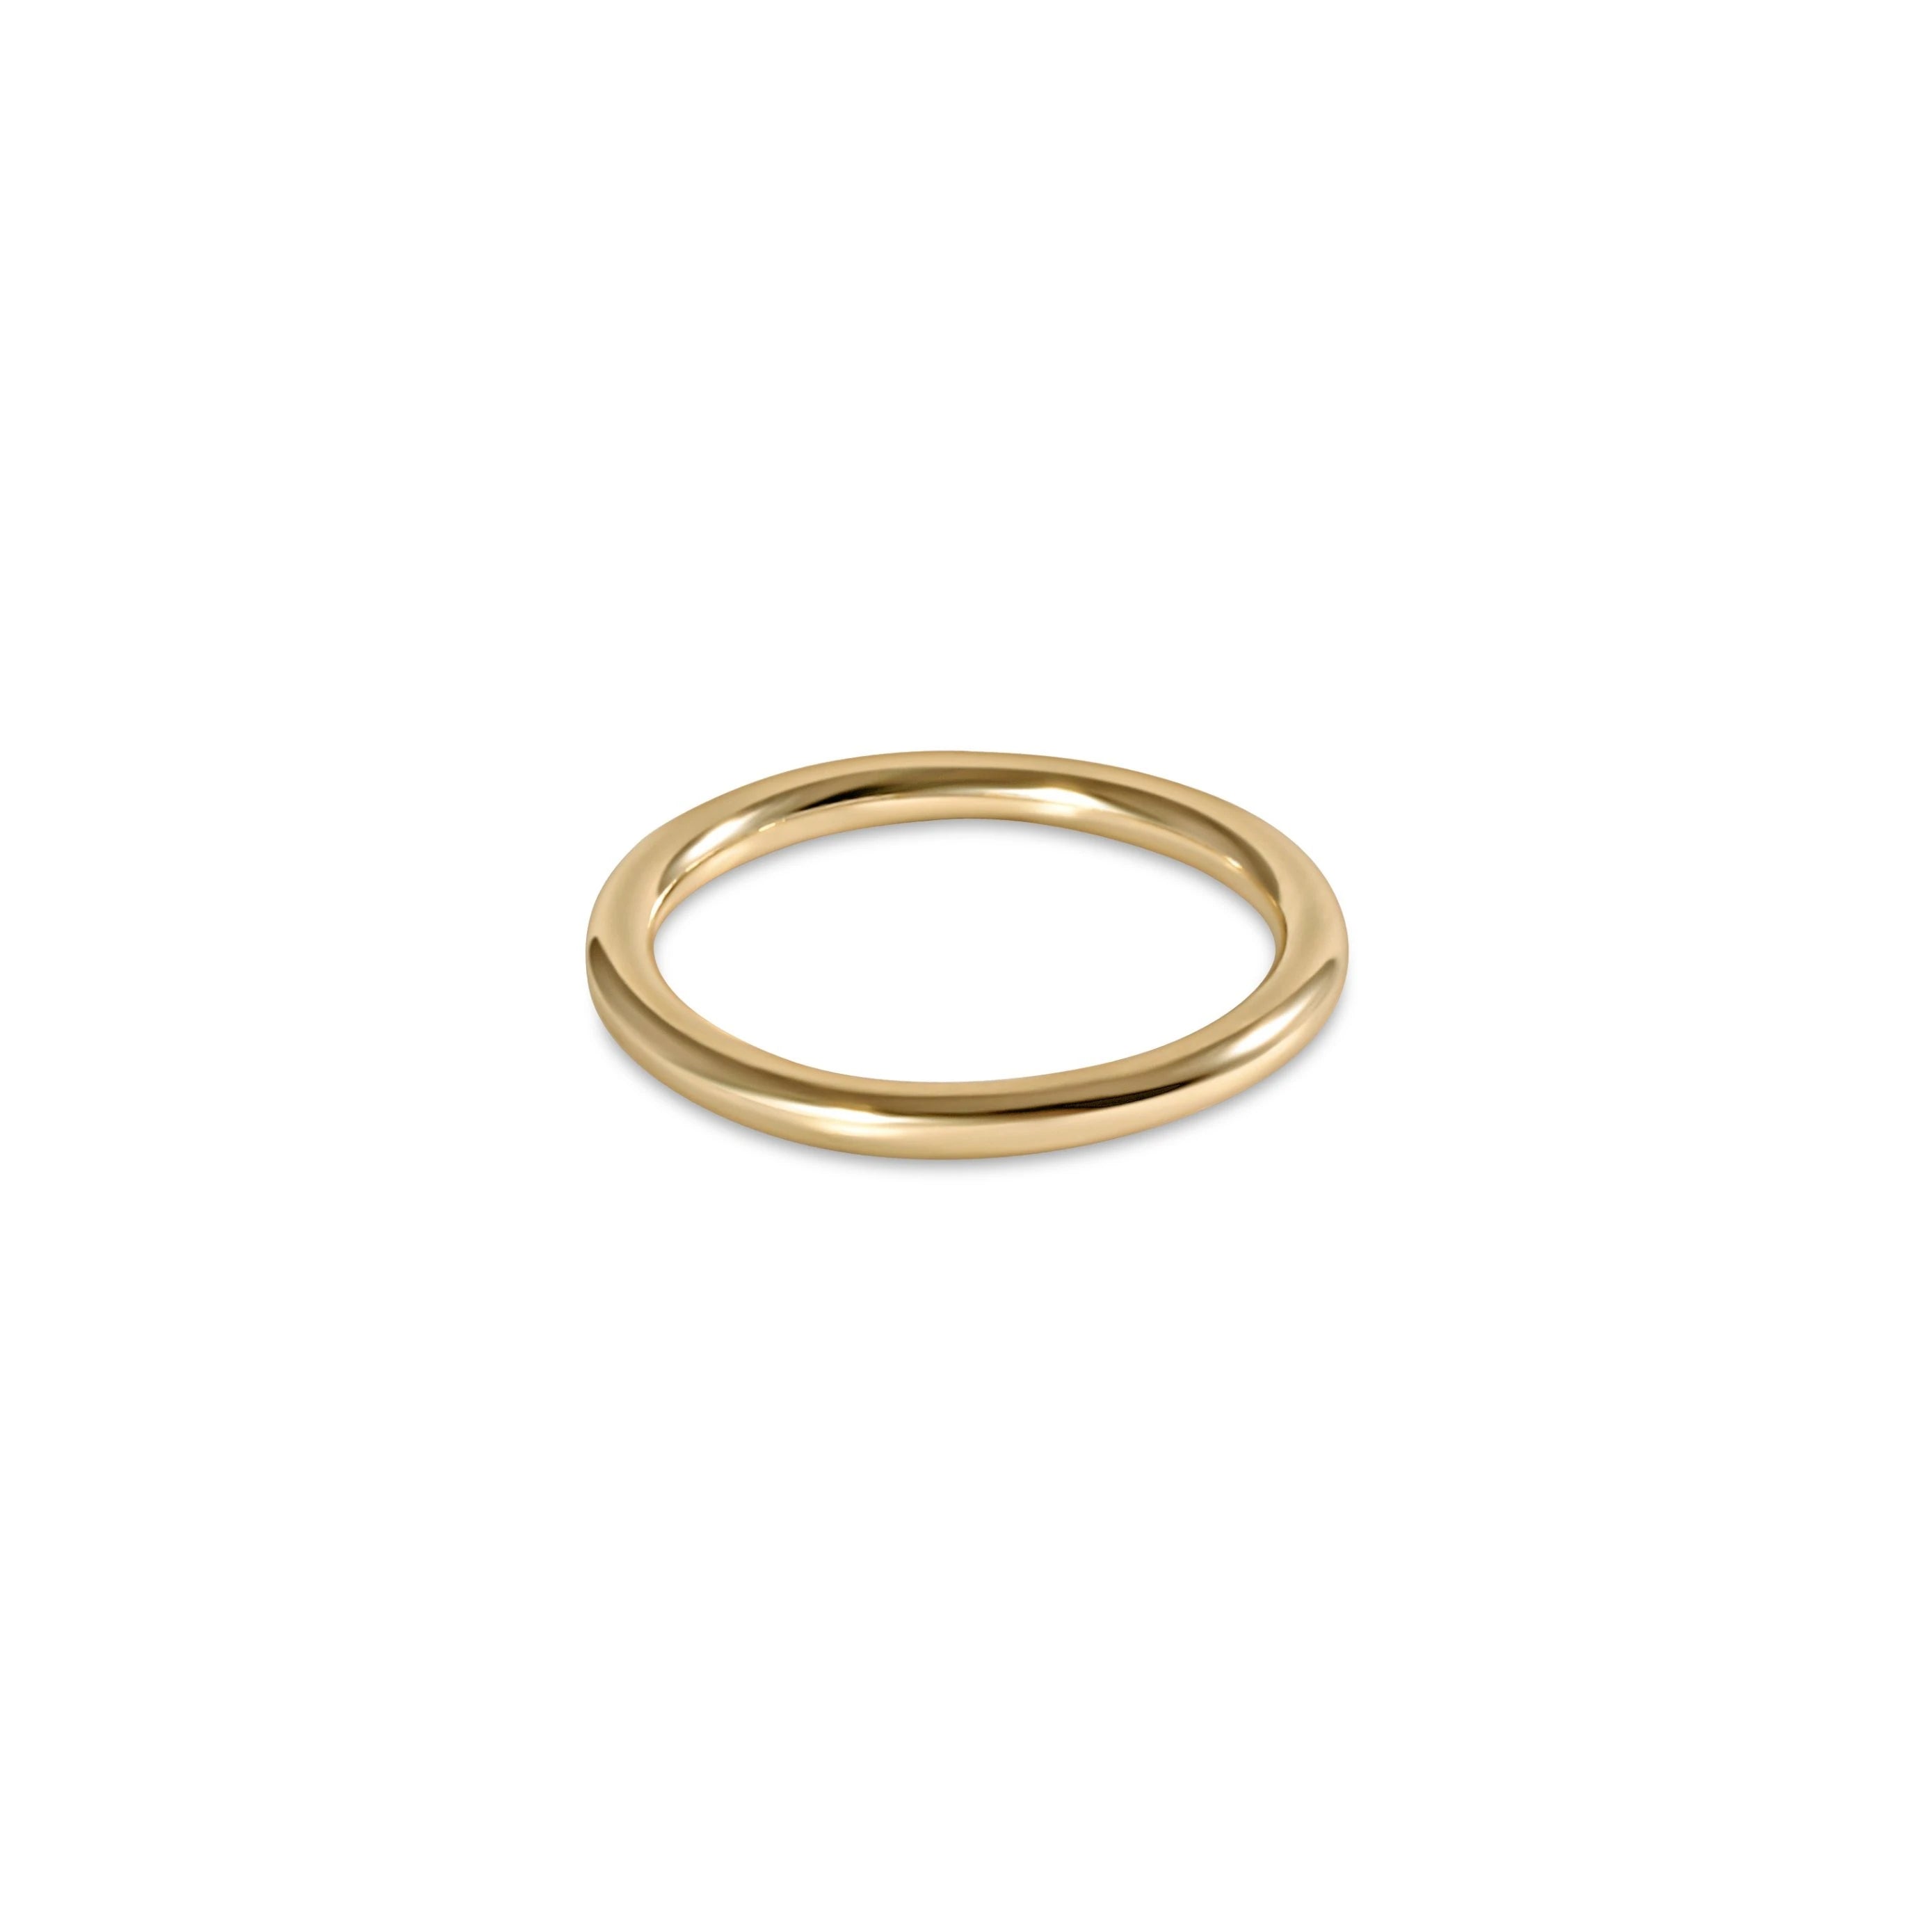 Classic Gold Ring-Rings-eNewton-The Lovely Closet, Women's Fashion Boutique in Alexandria, KY